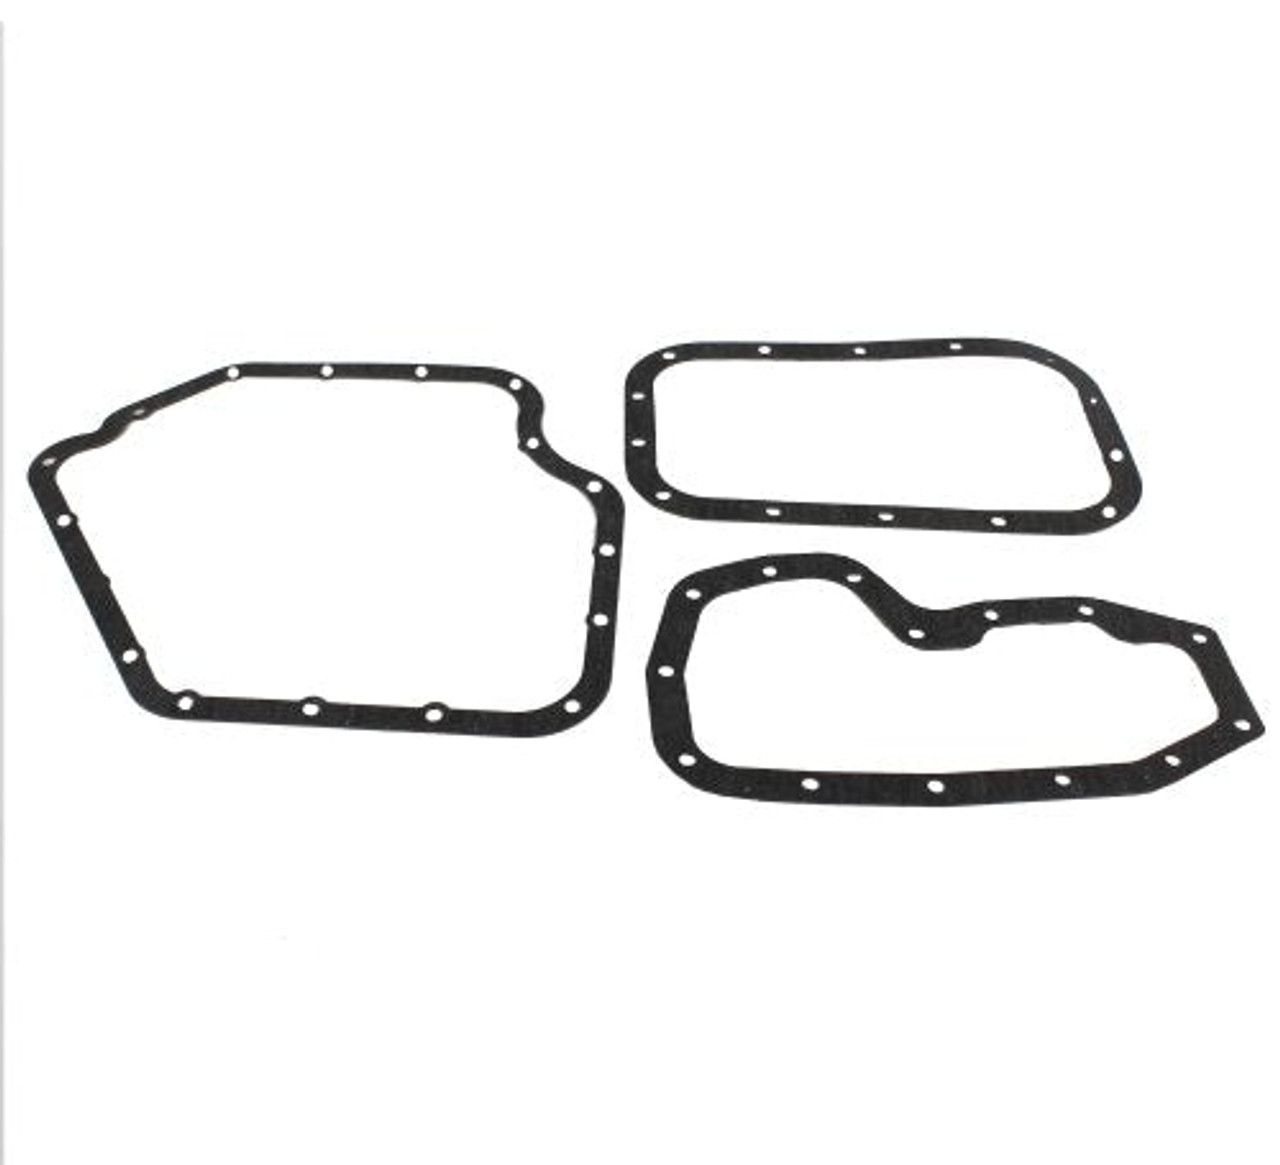 Lower Gasket Set - 2016 Chrysler Town & Country 3.6L Engine Parts # LGS1169ZE22